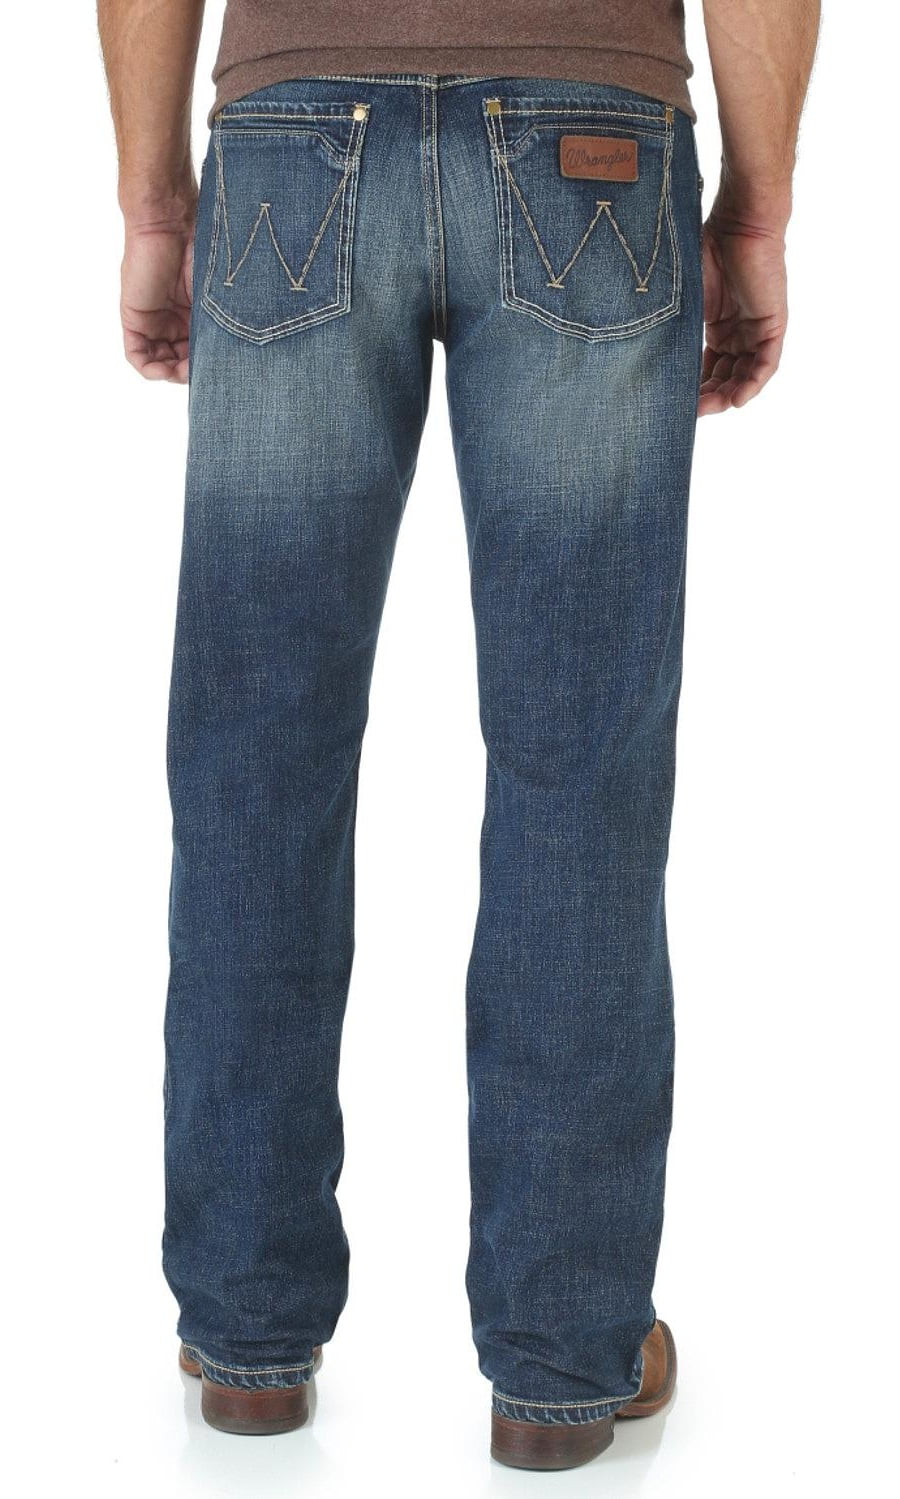 WLT77LY Wrangler Men/'s Retro Limited Edition Slim Fit Boot Cut Jean Color Layton